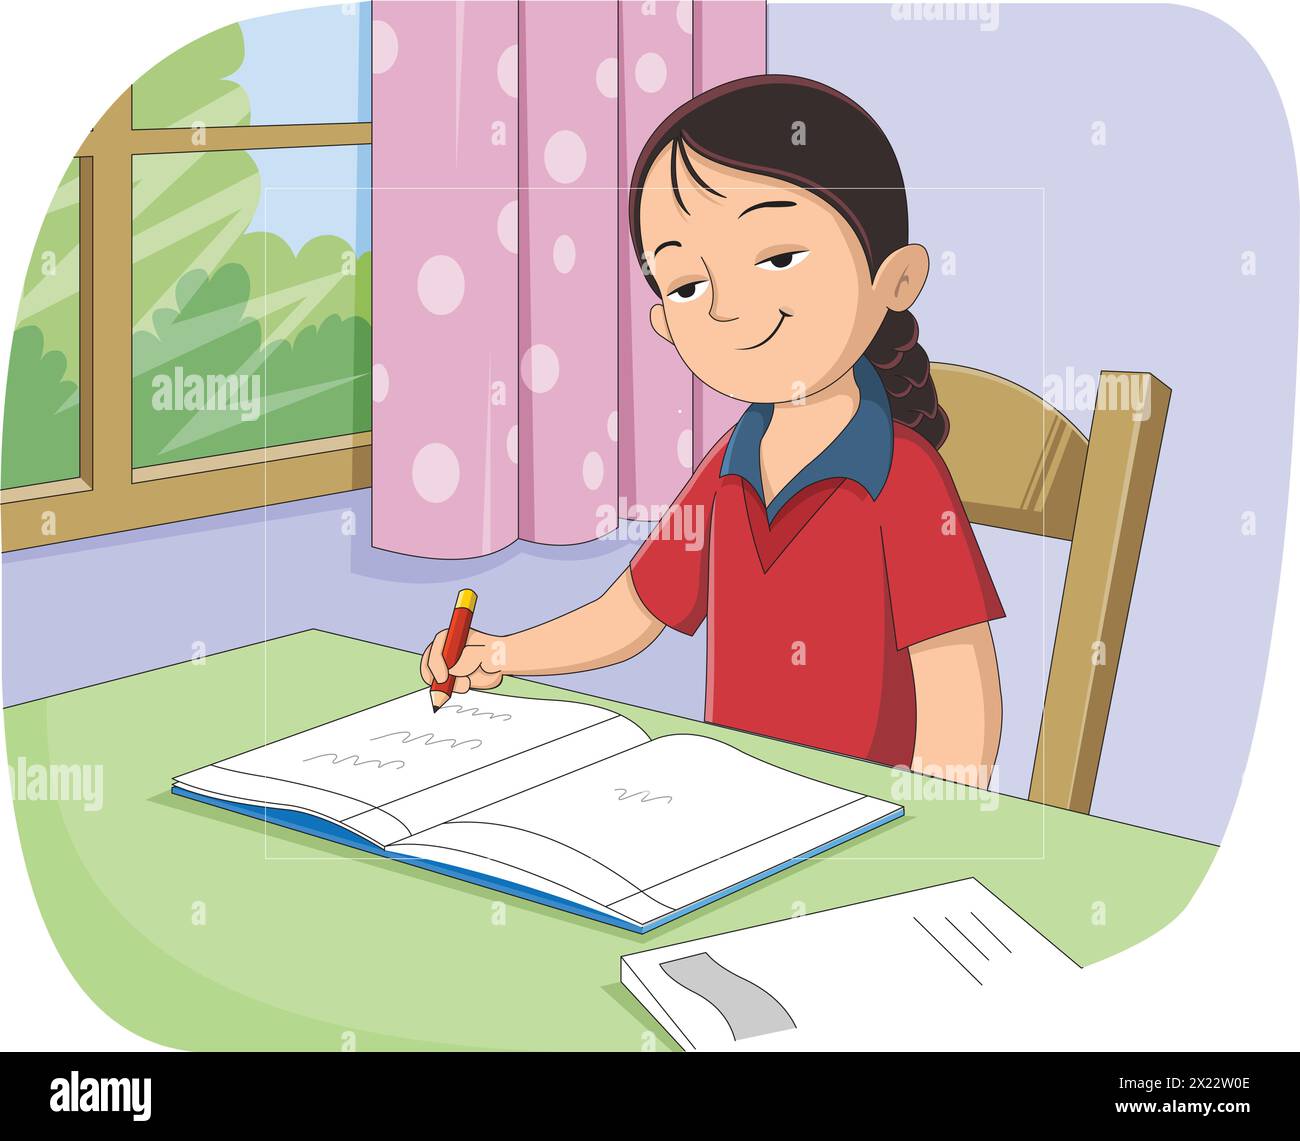 Cute smiling girl sitting on the chair and writing with a pencil Stock Vector